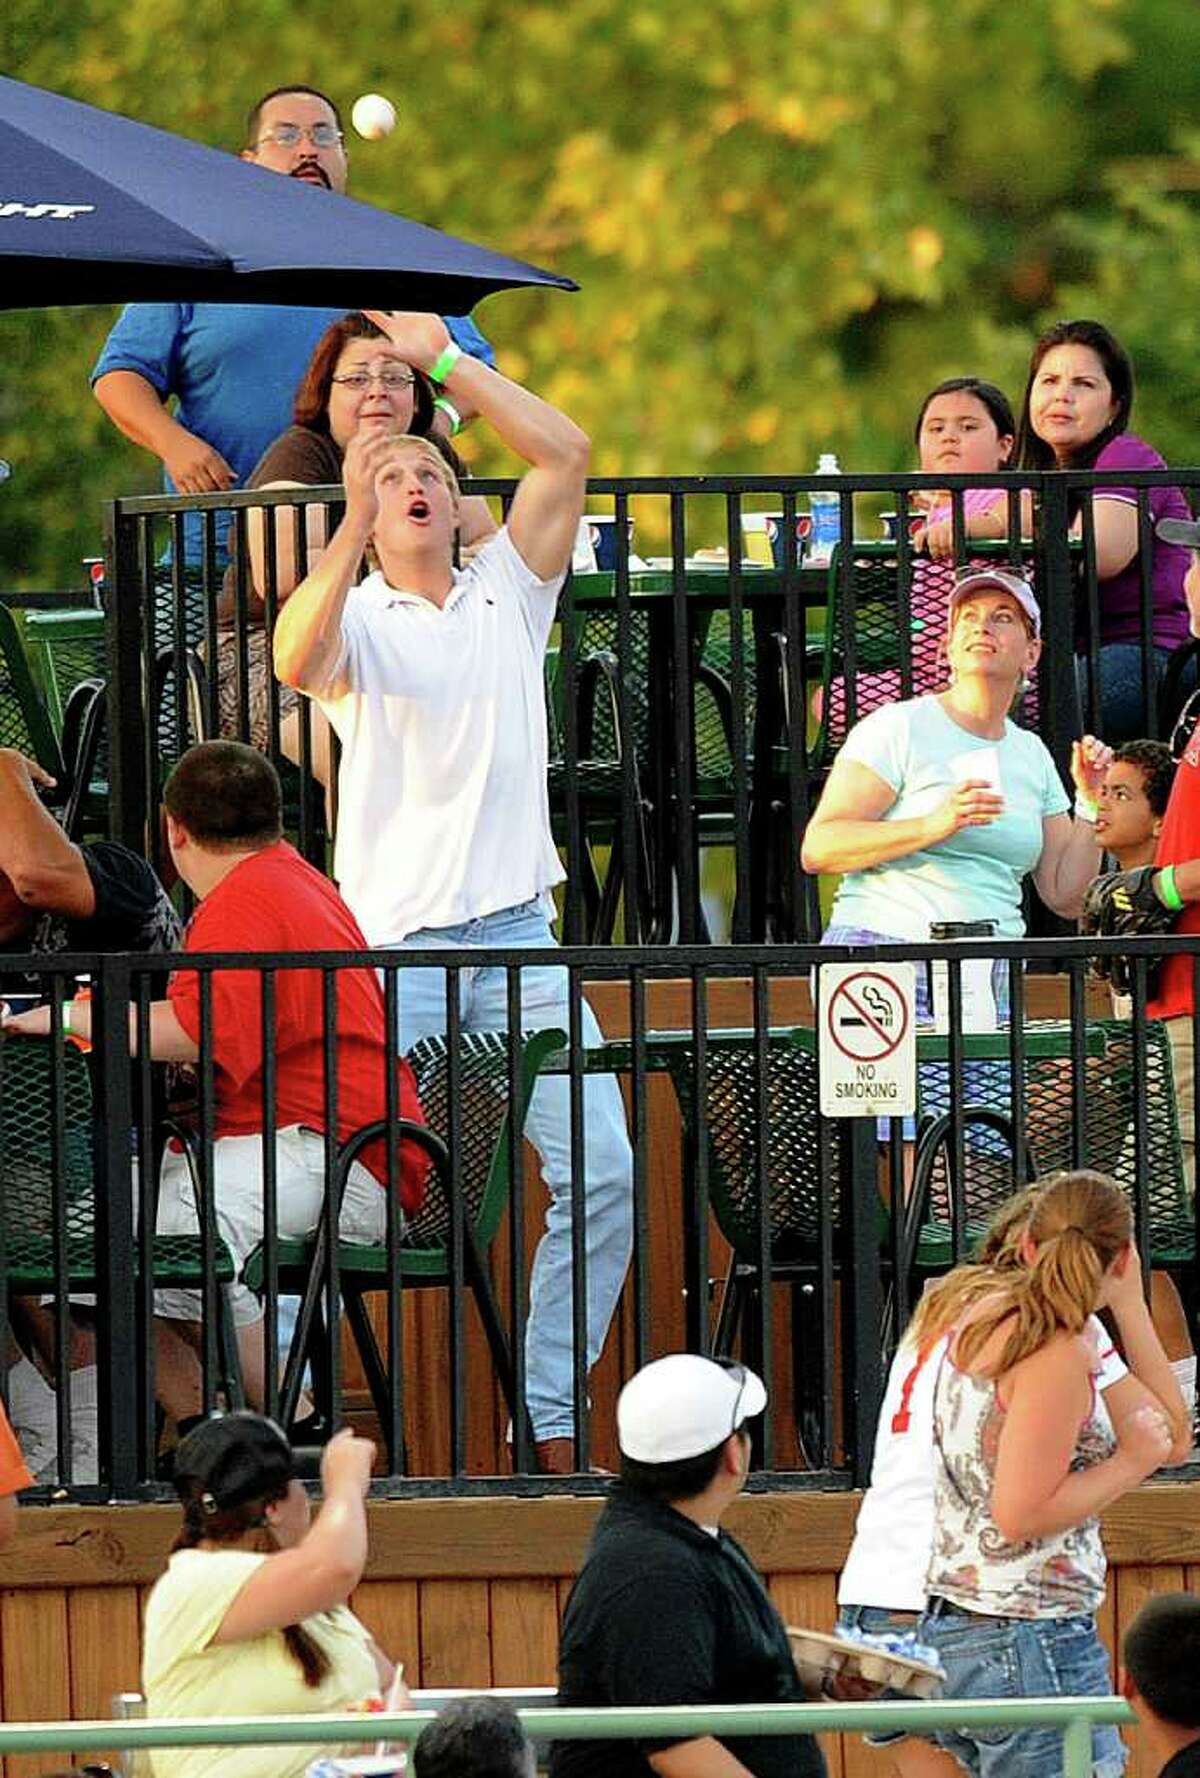 A fan reaches for a foul ball hit into the stands during Texas League action between the Northwest Arkansas Naturals and the San Antonio Missions at Wolff Stadium on Thursday, July 7, 2011. BILLY CALZADA / gcalzada@express-news.net